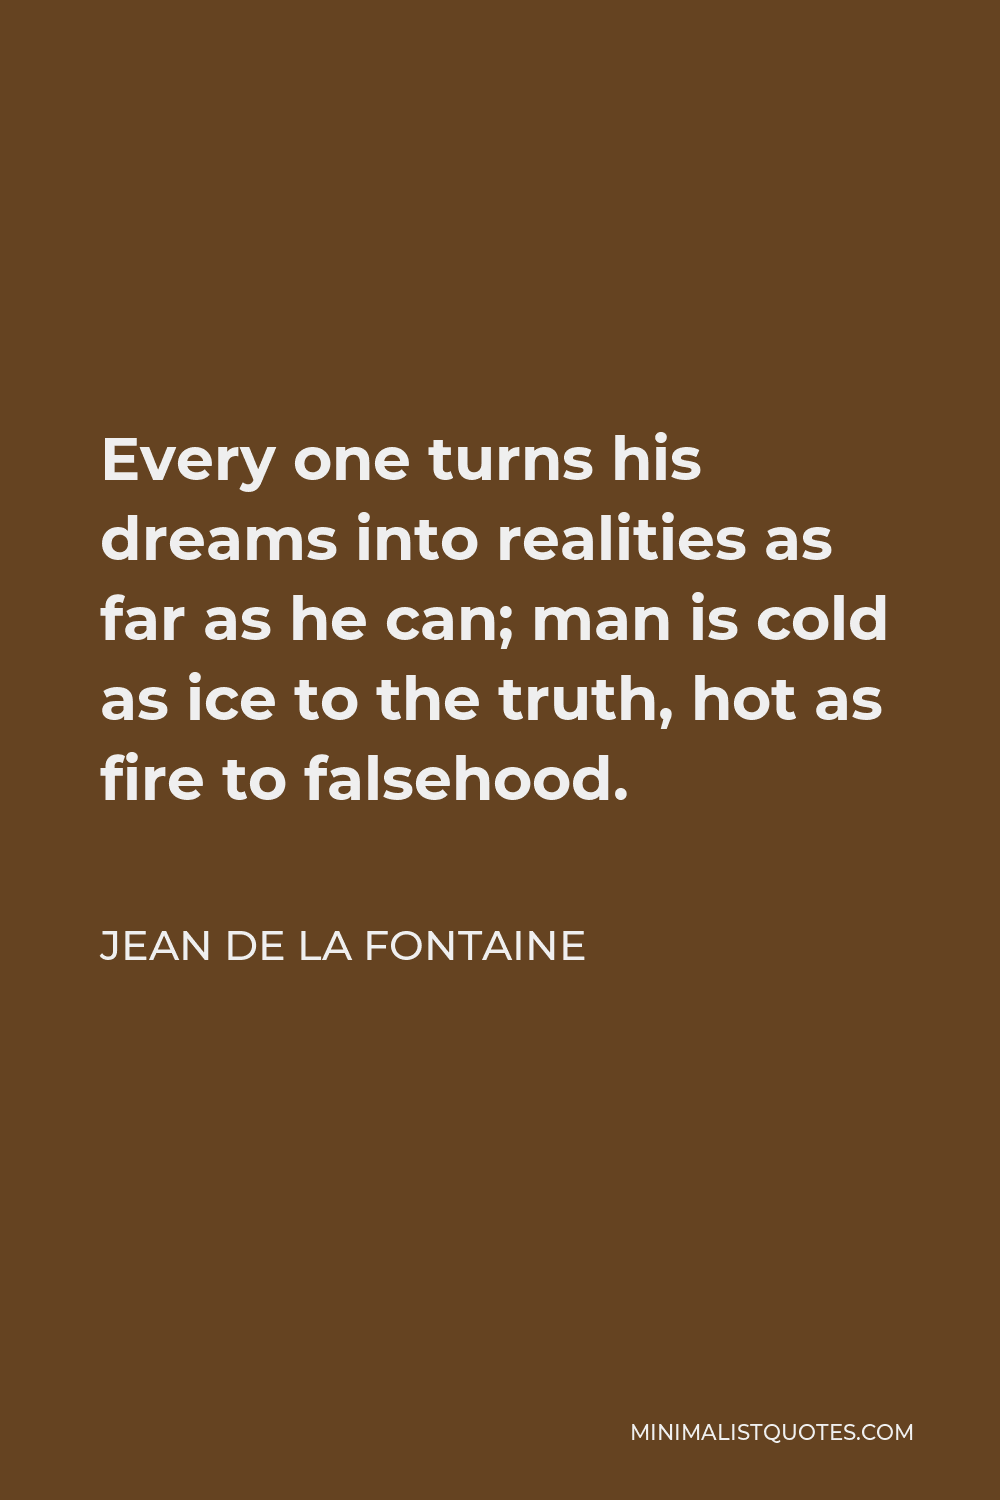 Jean de La Fontaine Quote - Every one turns his dreams into realities as far as he can; man is cold as ice to the truth, hot as fire to falsehood.